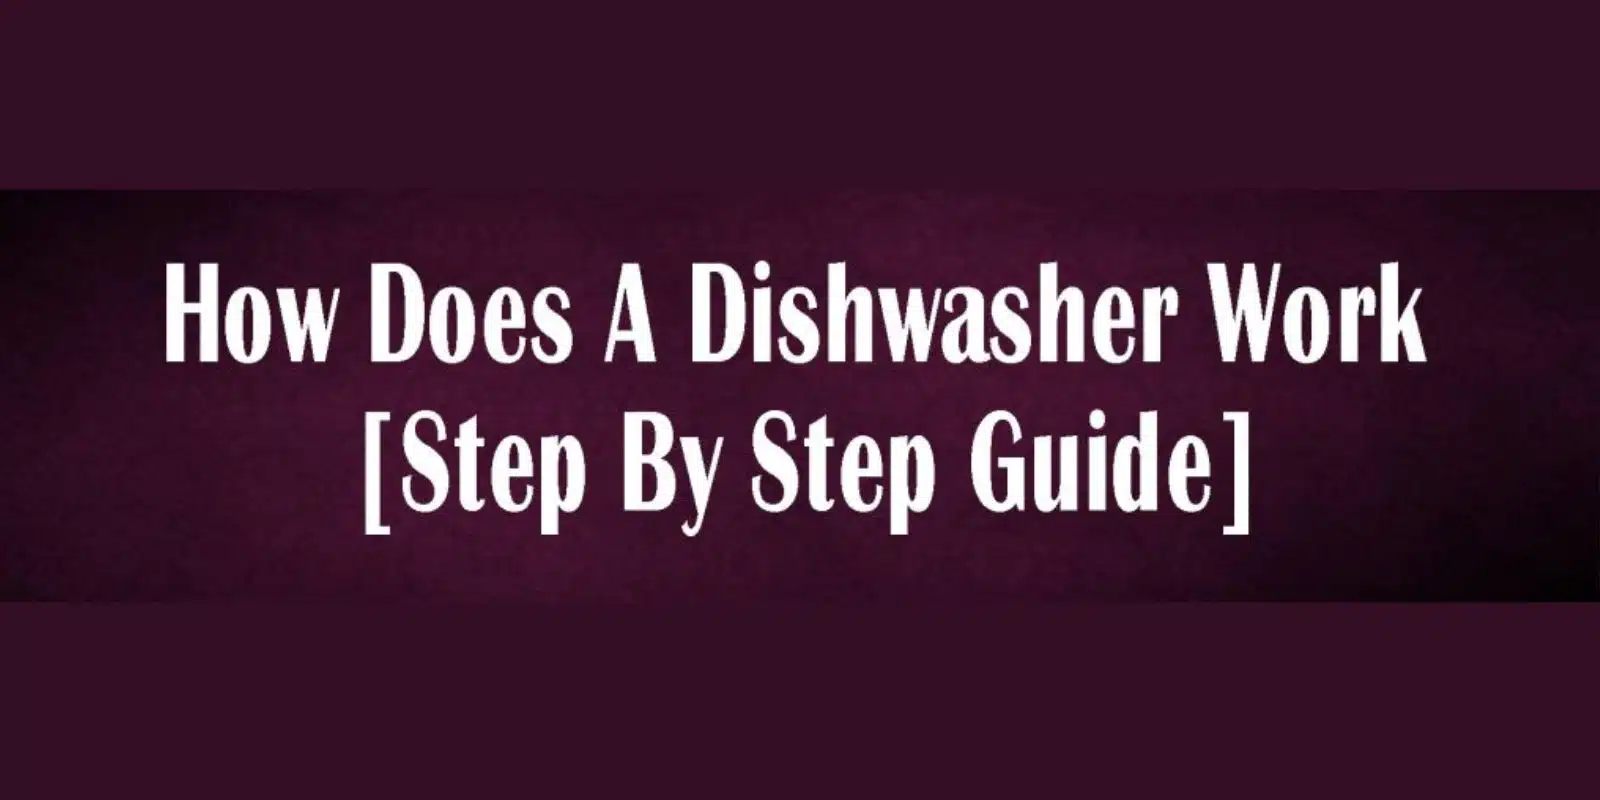 How Does A Dishwasher Work [Step By Step Guide] – (2022)